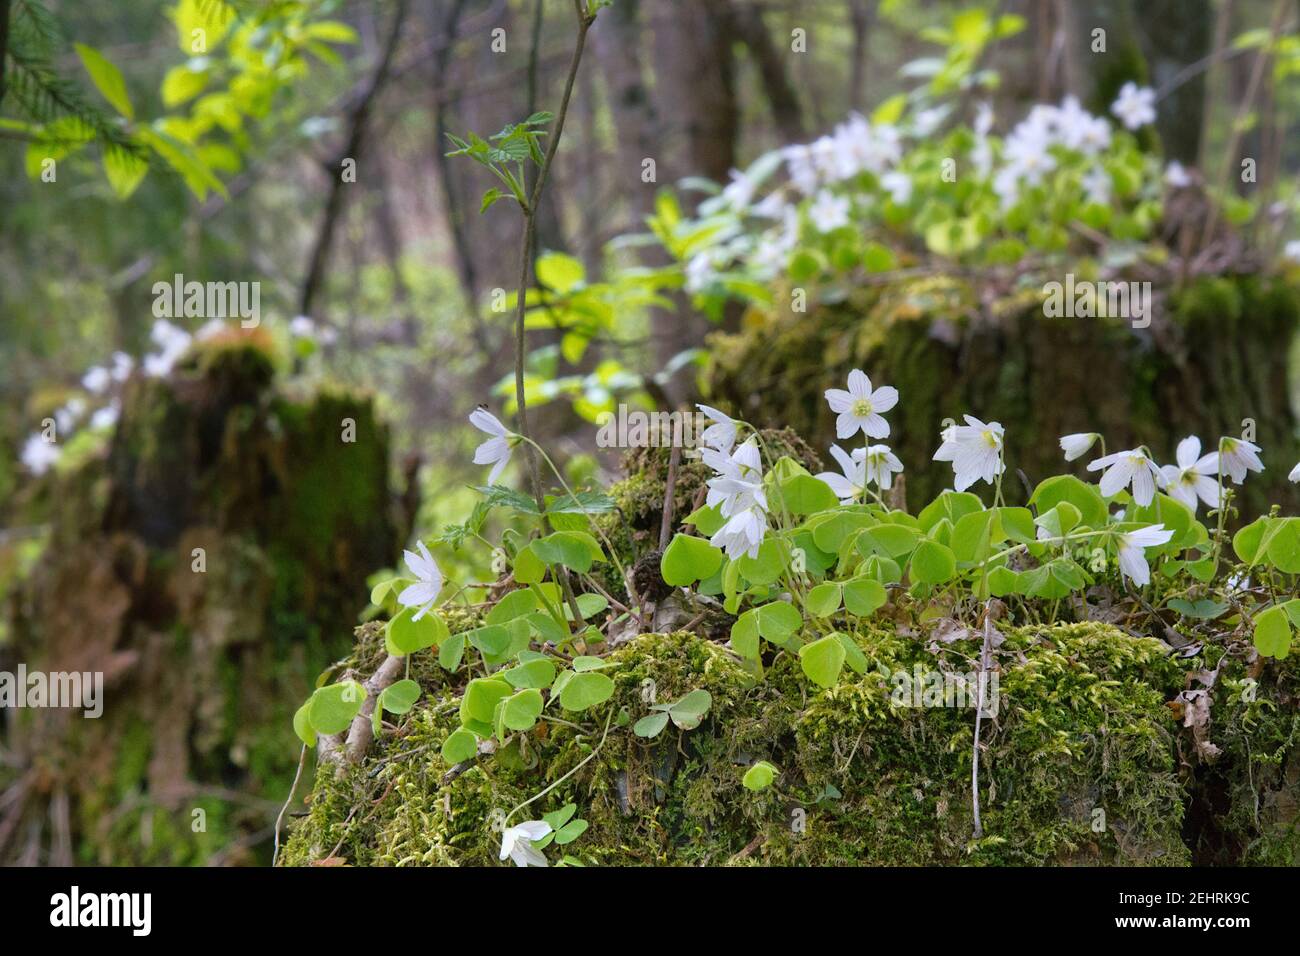 Shamrock (Oxalis acetosella) on beautiful mossy stumps. Natural flowerbed. Plant of Europe and Asia shady dark coniferous forests. Medicinal plant: an Stock Photo